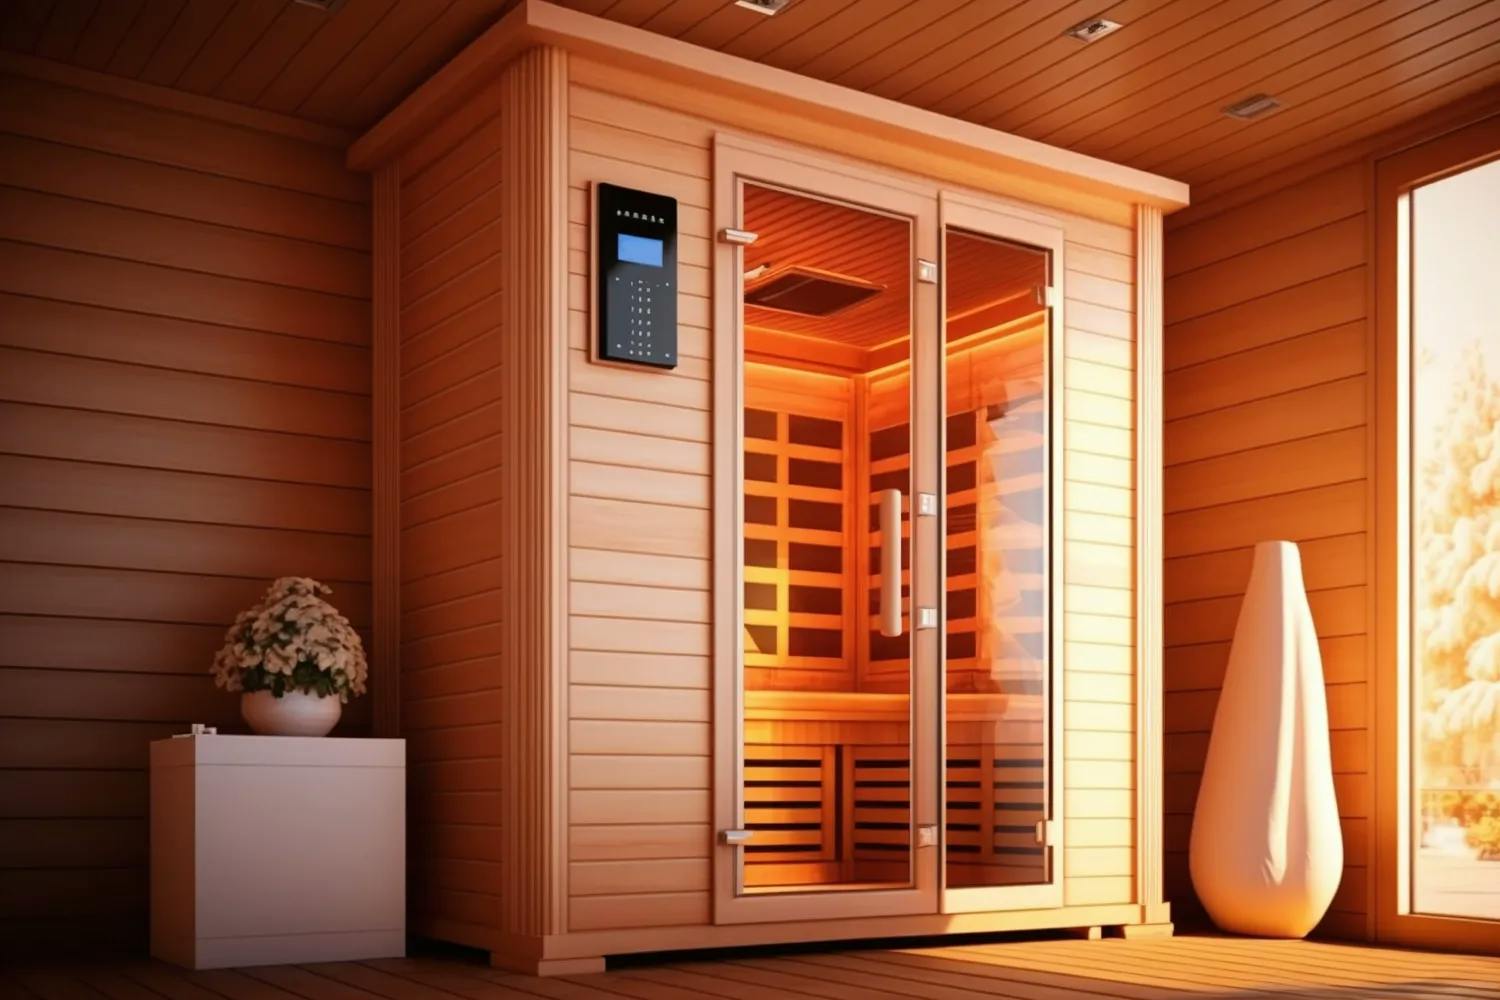 How To Get a Sauna With Your HSA